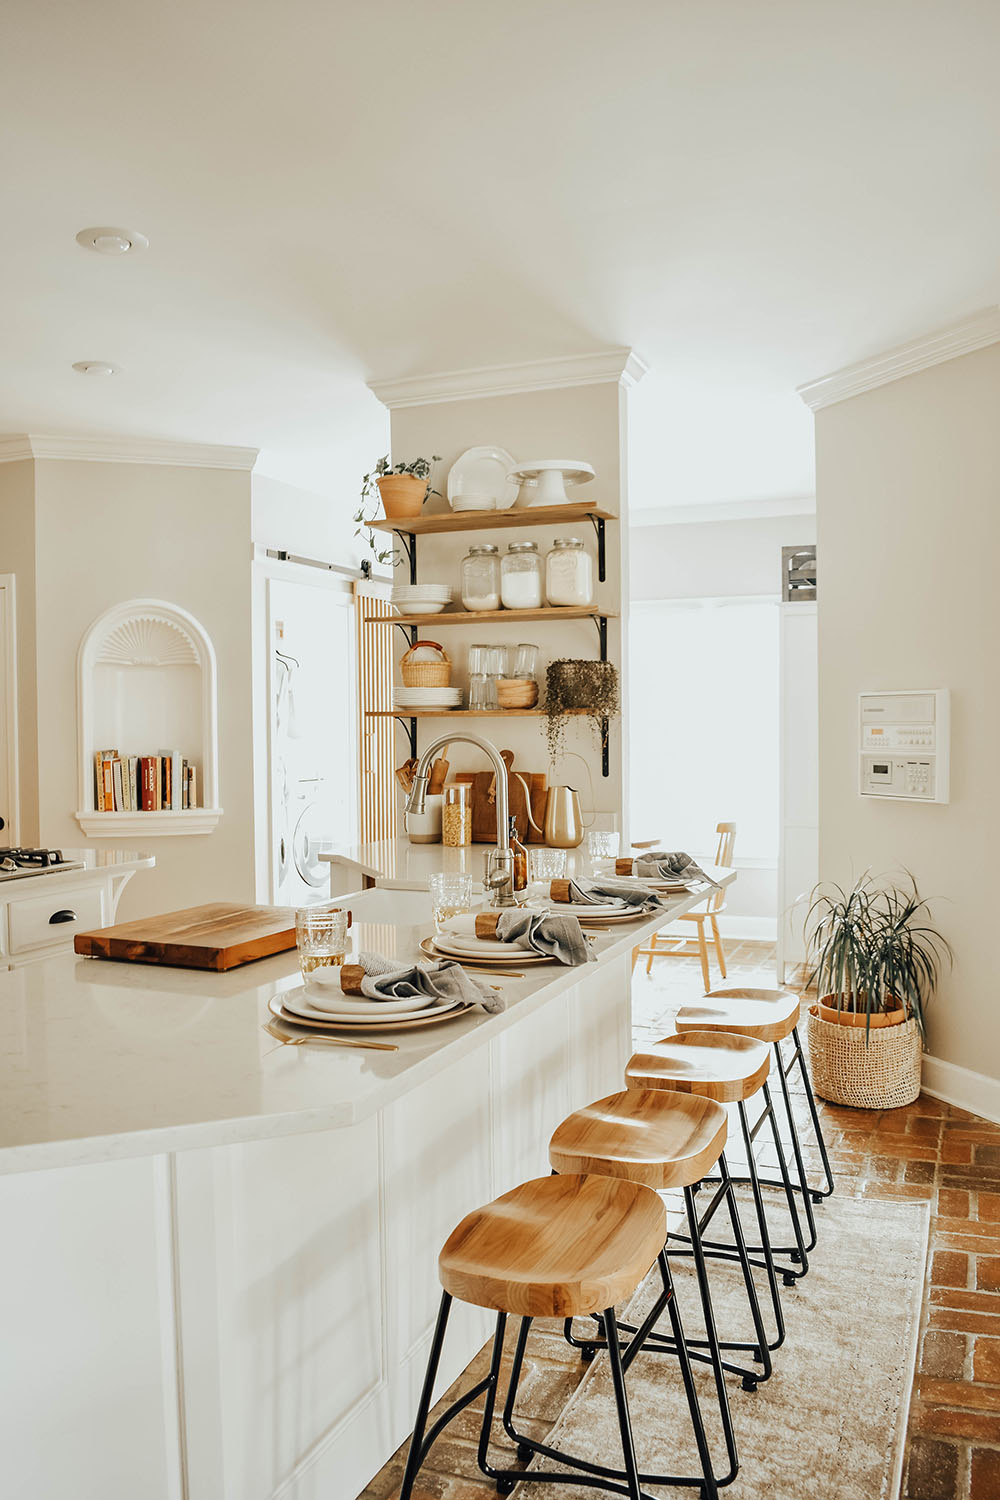 A kitchen with open shelving, black and wooden barstools, and place settings on an island.